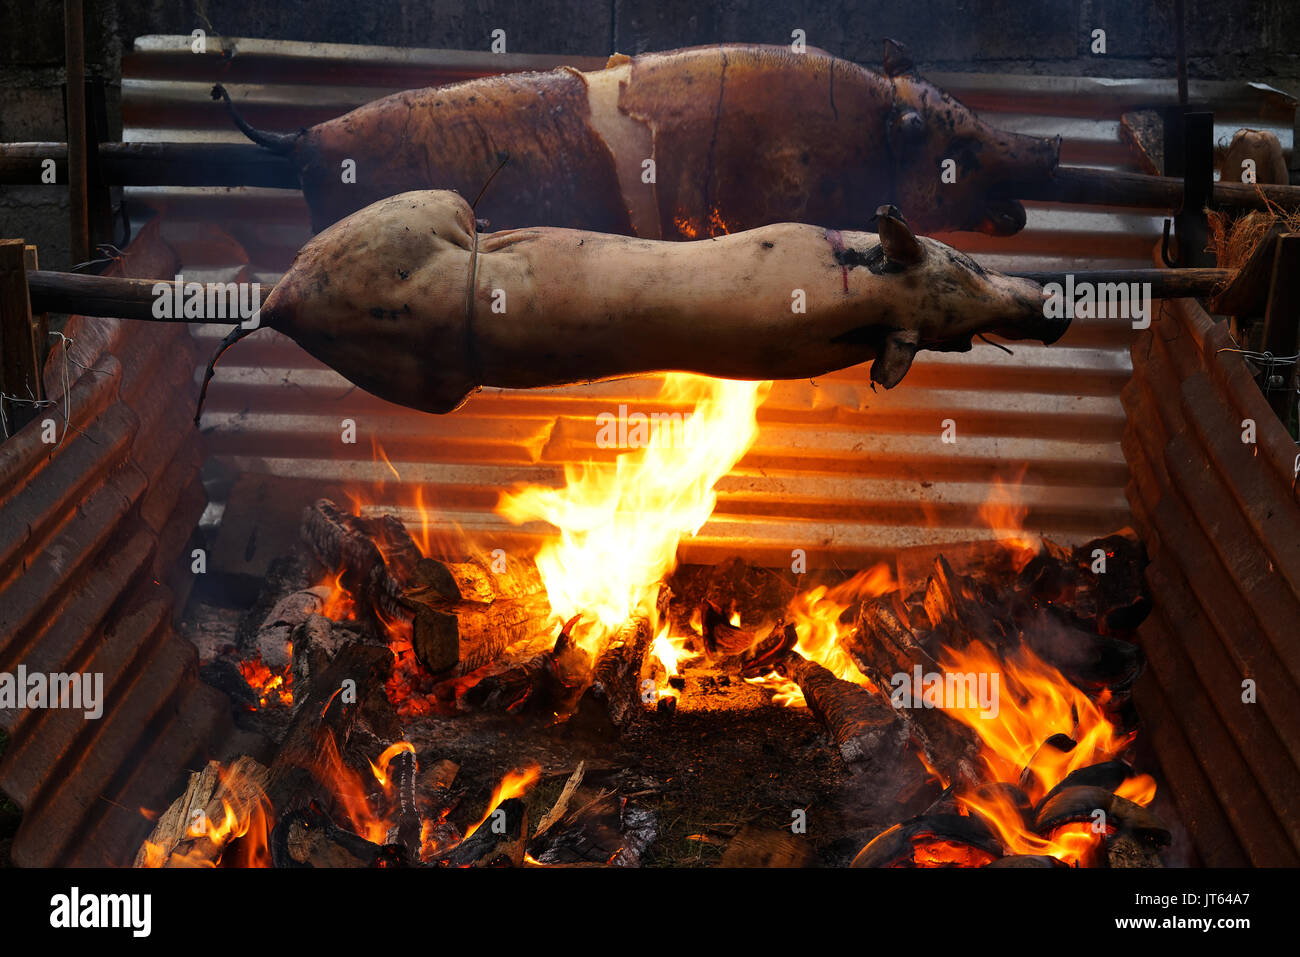 Tasty pigs traditionally prepared for dinner on a rotating spit with hot fire and coal underneath. Stock Photo